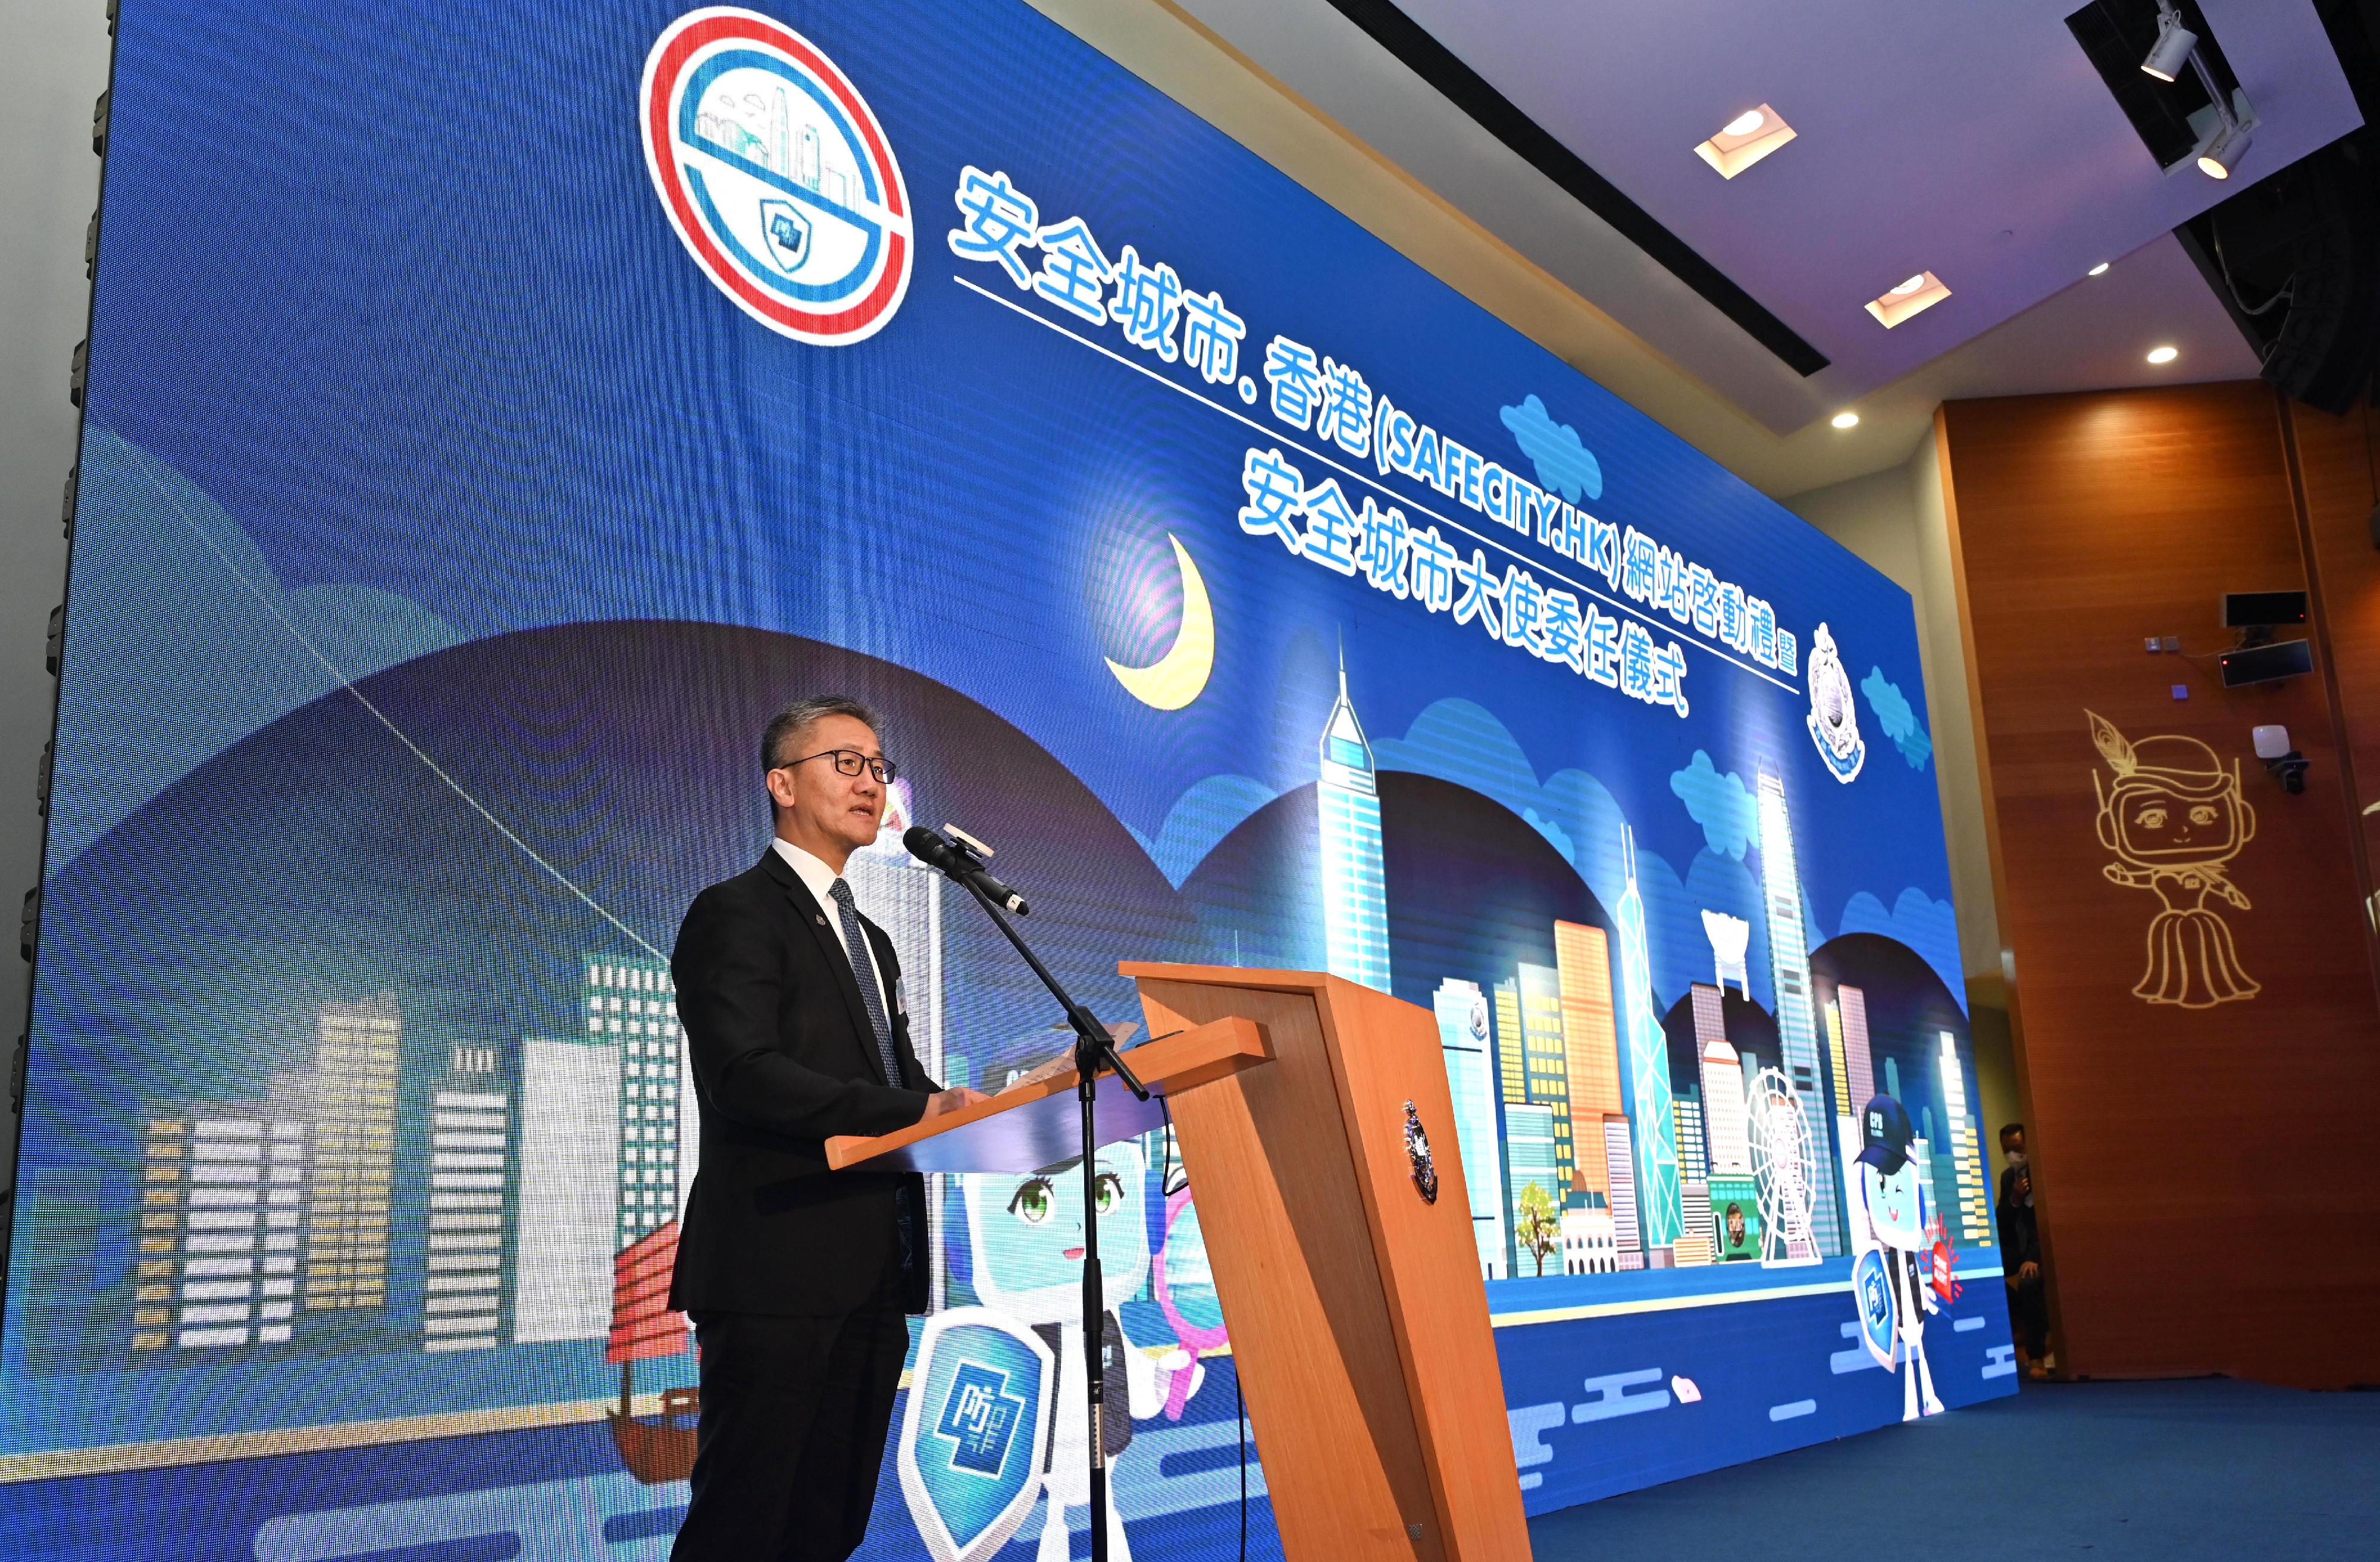 The Police Force today (May 16) launched a brand-new crime prevention website “SafeCity.HK” and appointed 47 “SafeCity Ambassadors”. Photo shows the Commissioner of Police, Mr Siu Chak-yee, speaking at the launching ceremony.